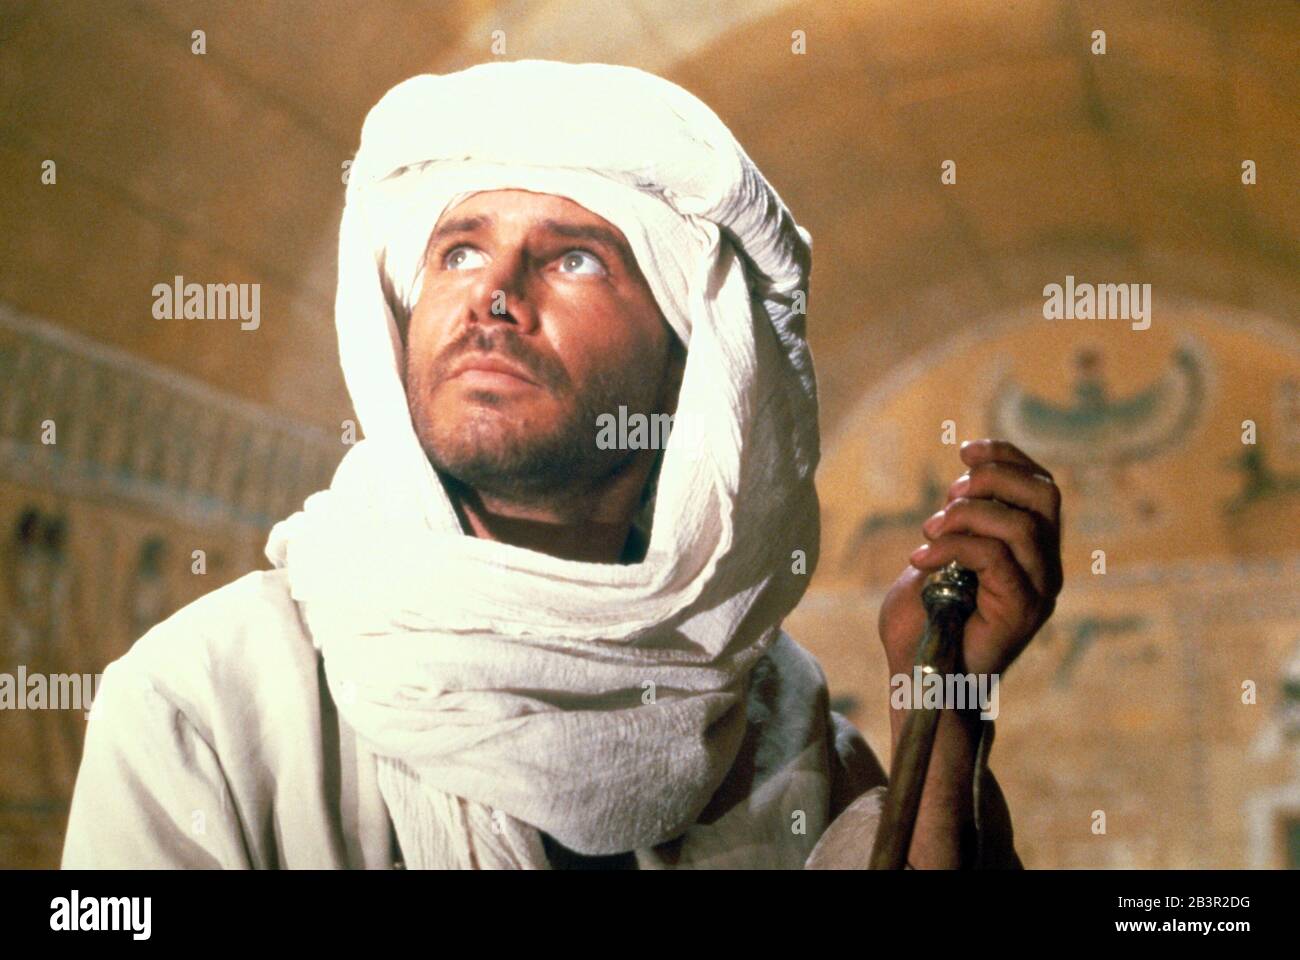 raiders of the lost ark Stock Photo